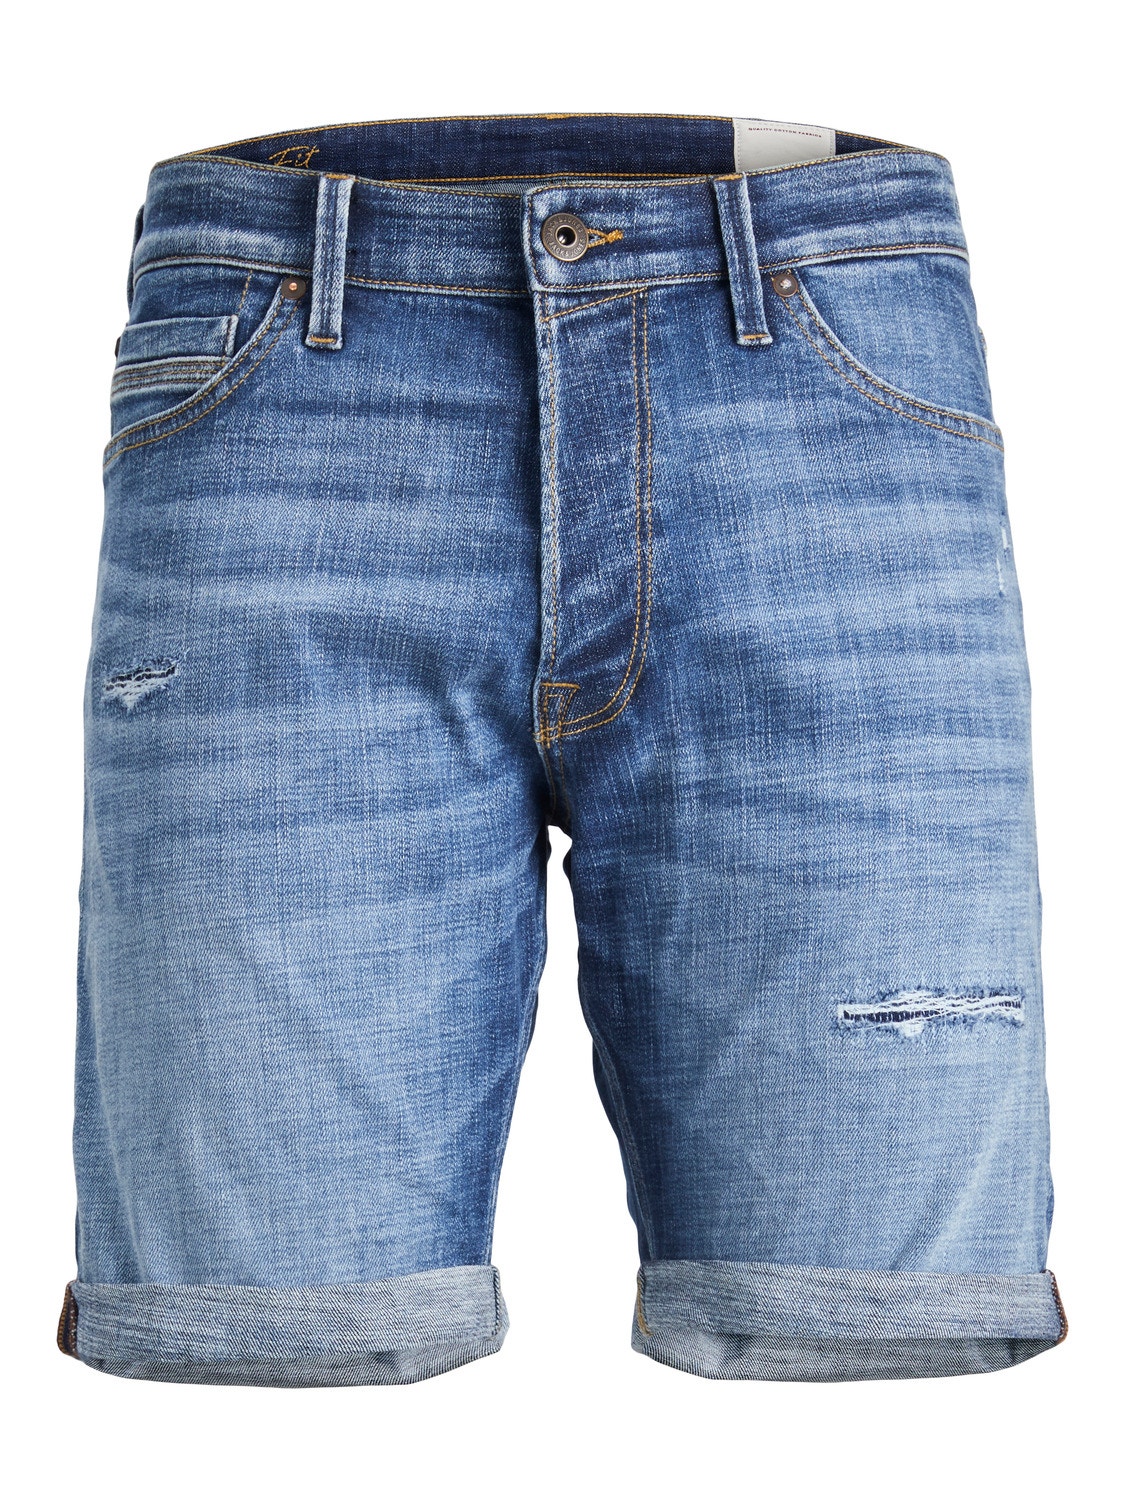 Relaxed Fit Denim shorts with 20% discount! | Jack & Jones®